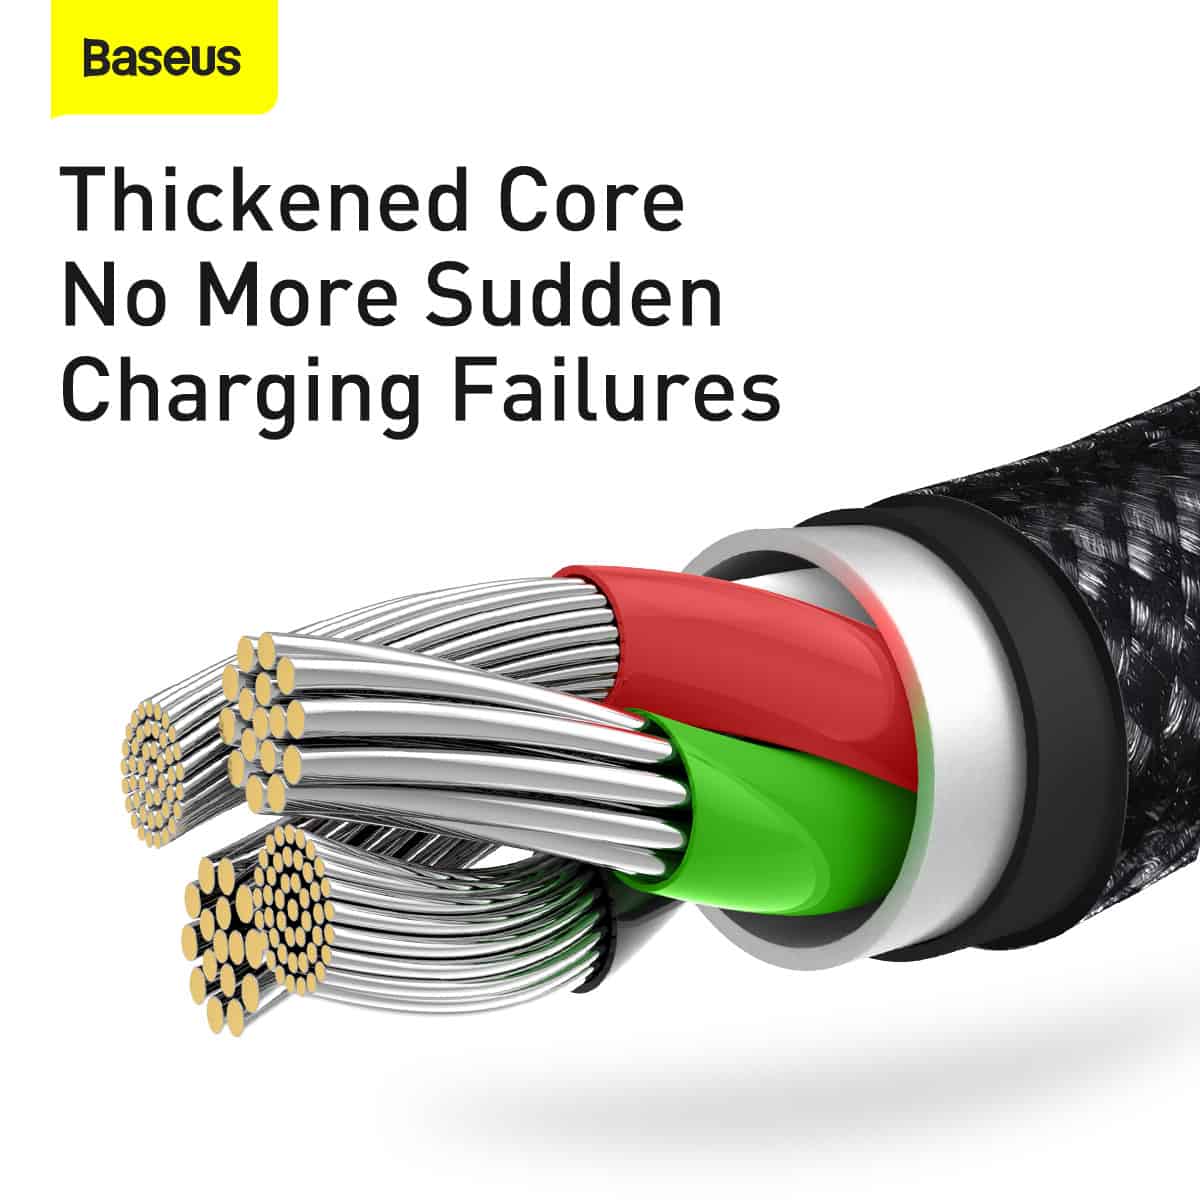 Baseus Tungsten Gold 3.5A 3 in 1 fast Charging Cable